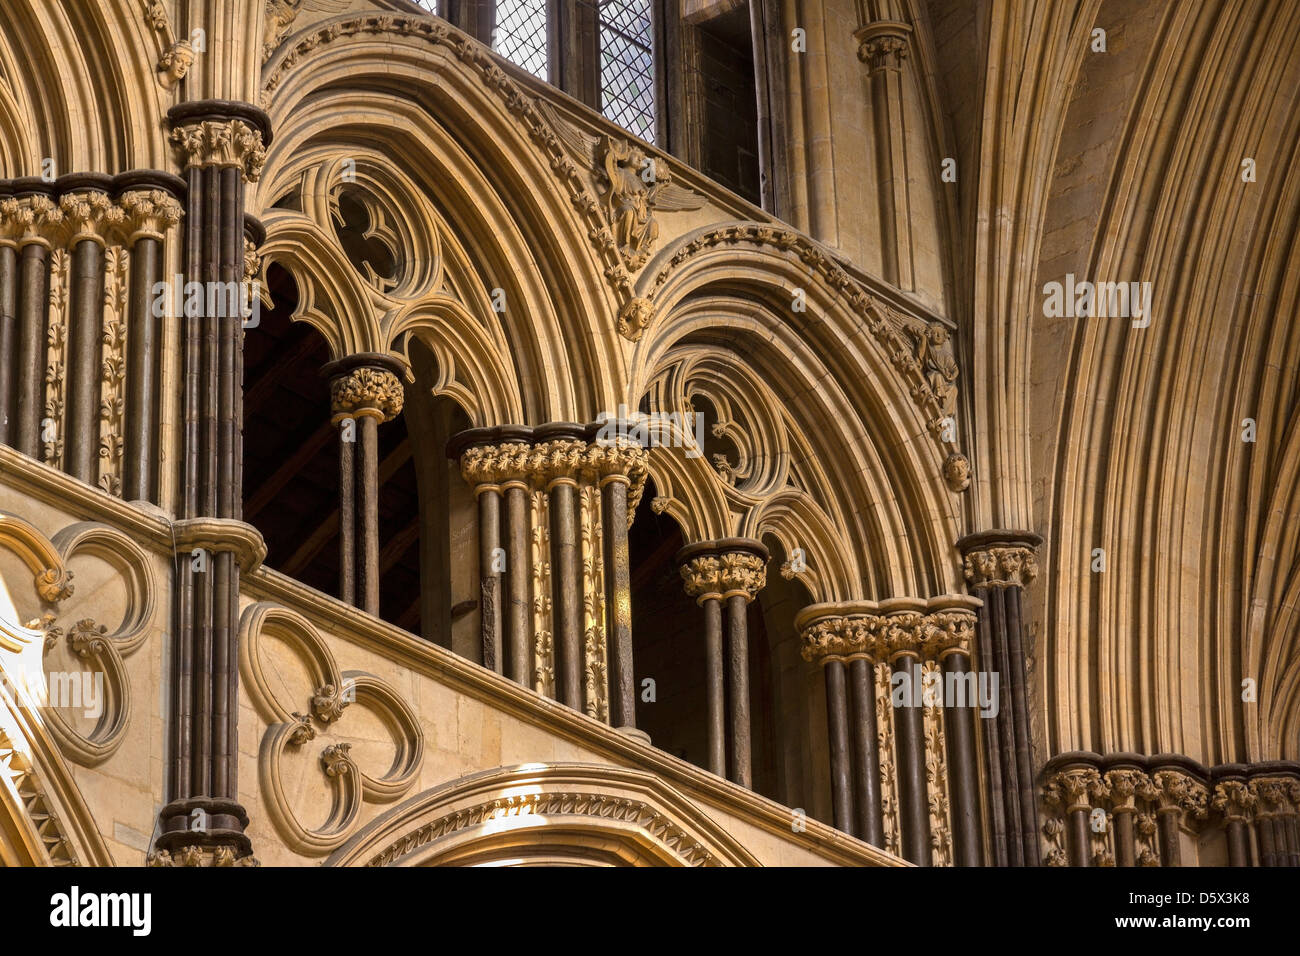 Pointed Gothic stone masonry arches in Angel Choir of Lincoln Cathedral, Lincolnshire, England, UK Stock Photo